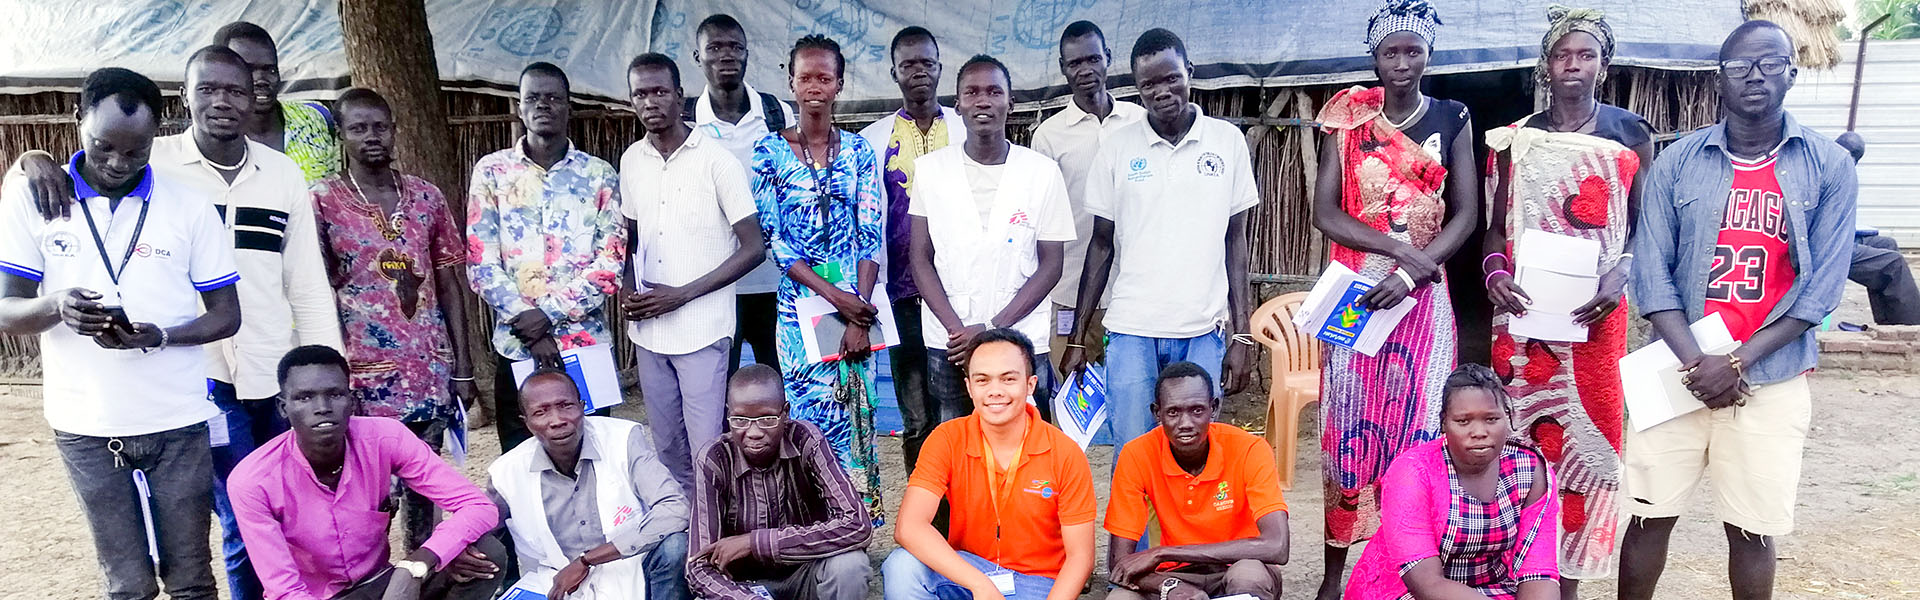 Nohman with local peacebuilders in South Sudan outside and posing for picture